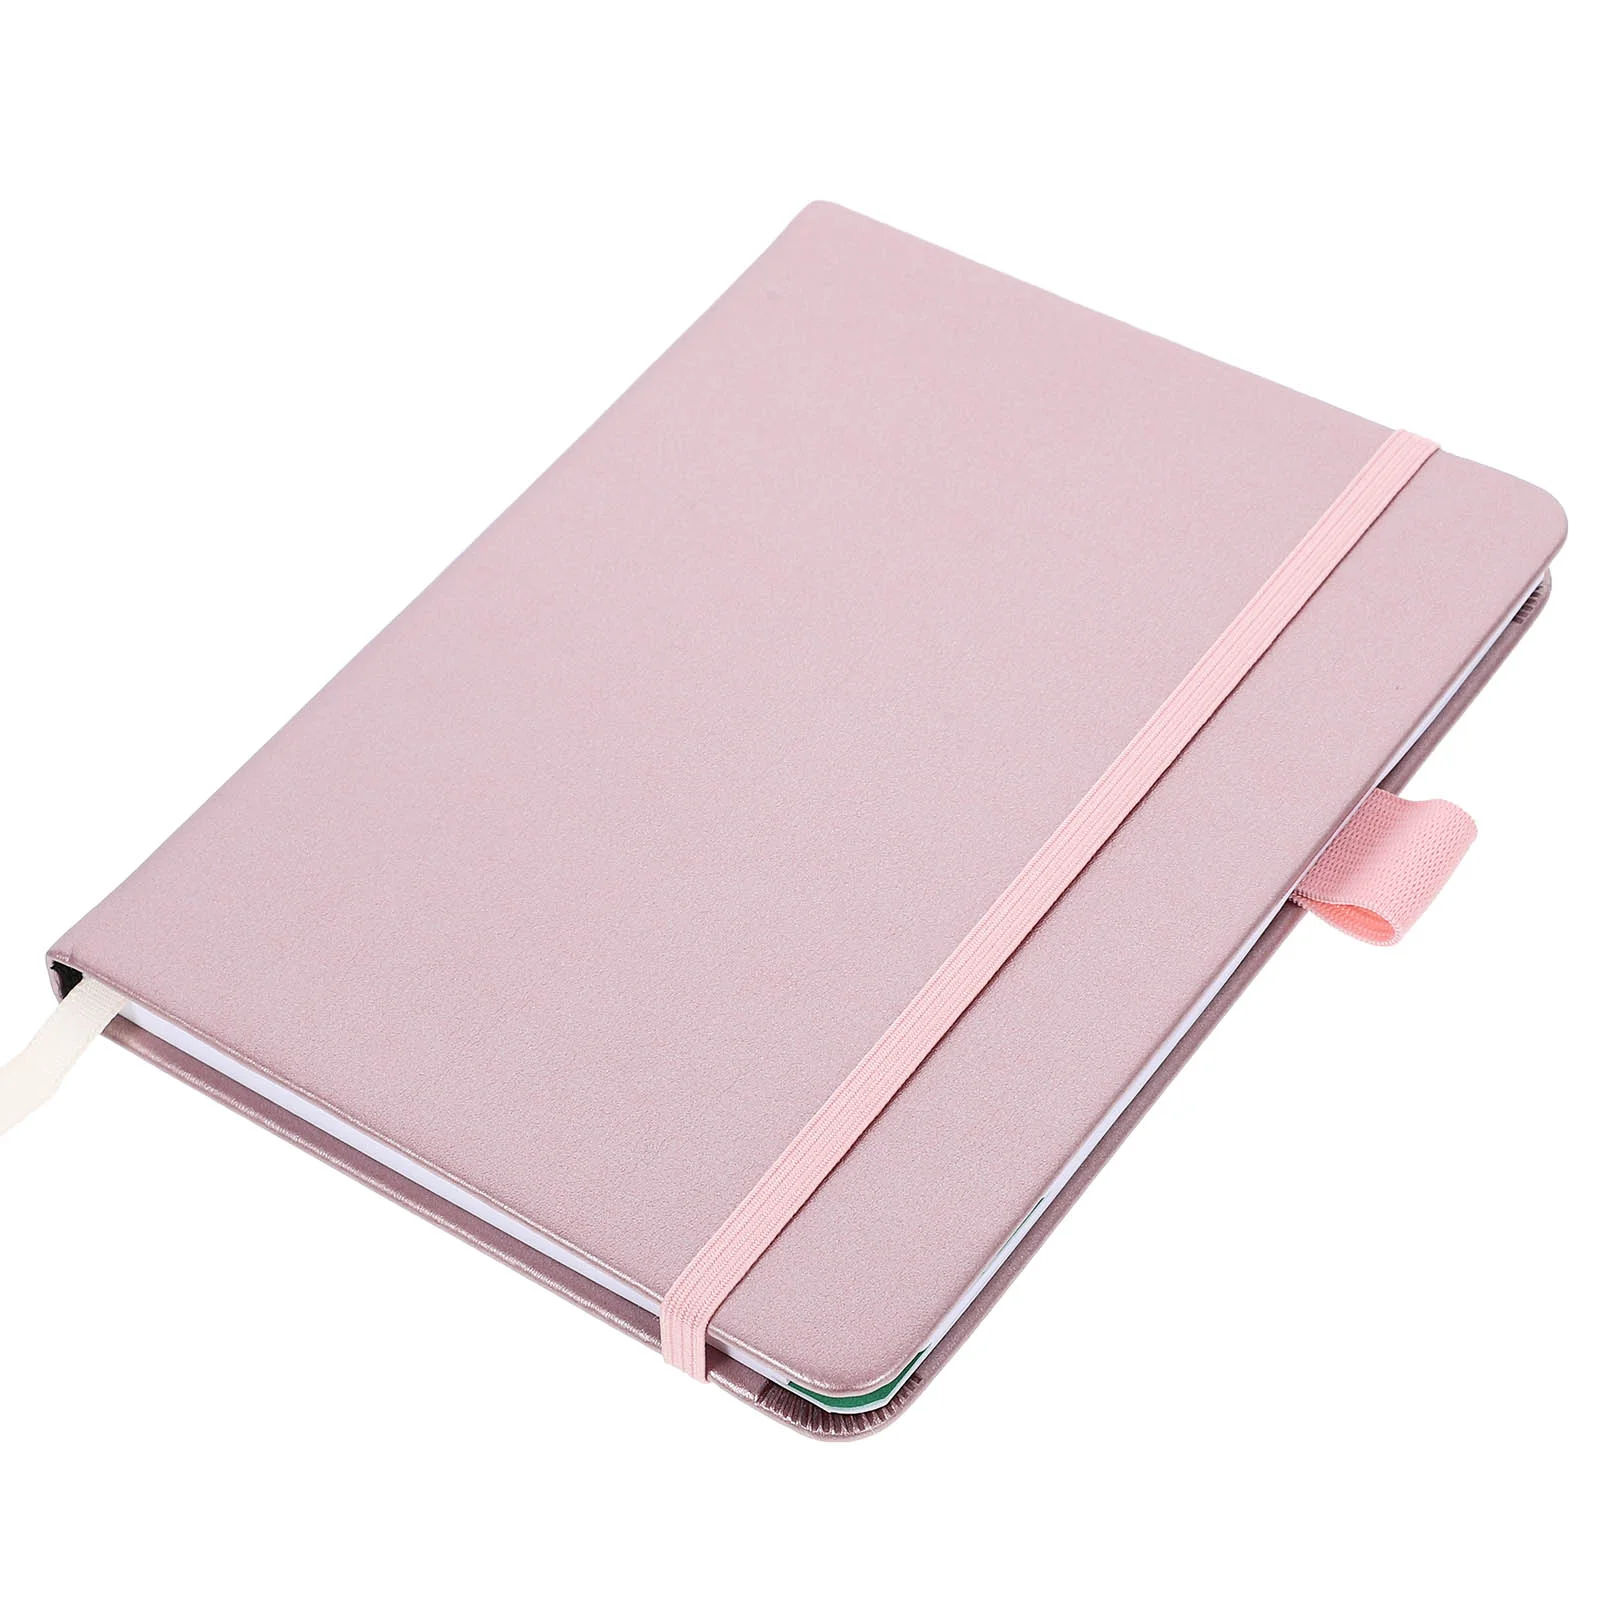 A6 Contact Book Mini Address Book Small Address Organizer Phone Book for Addresses phone book Phone Numbers Belt Index Page